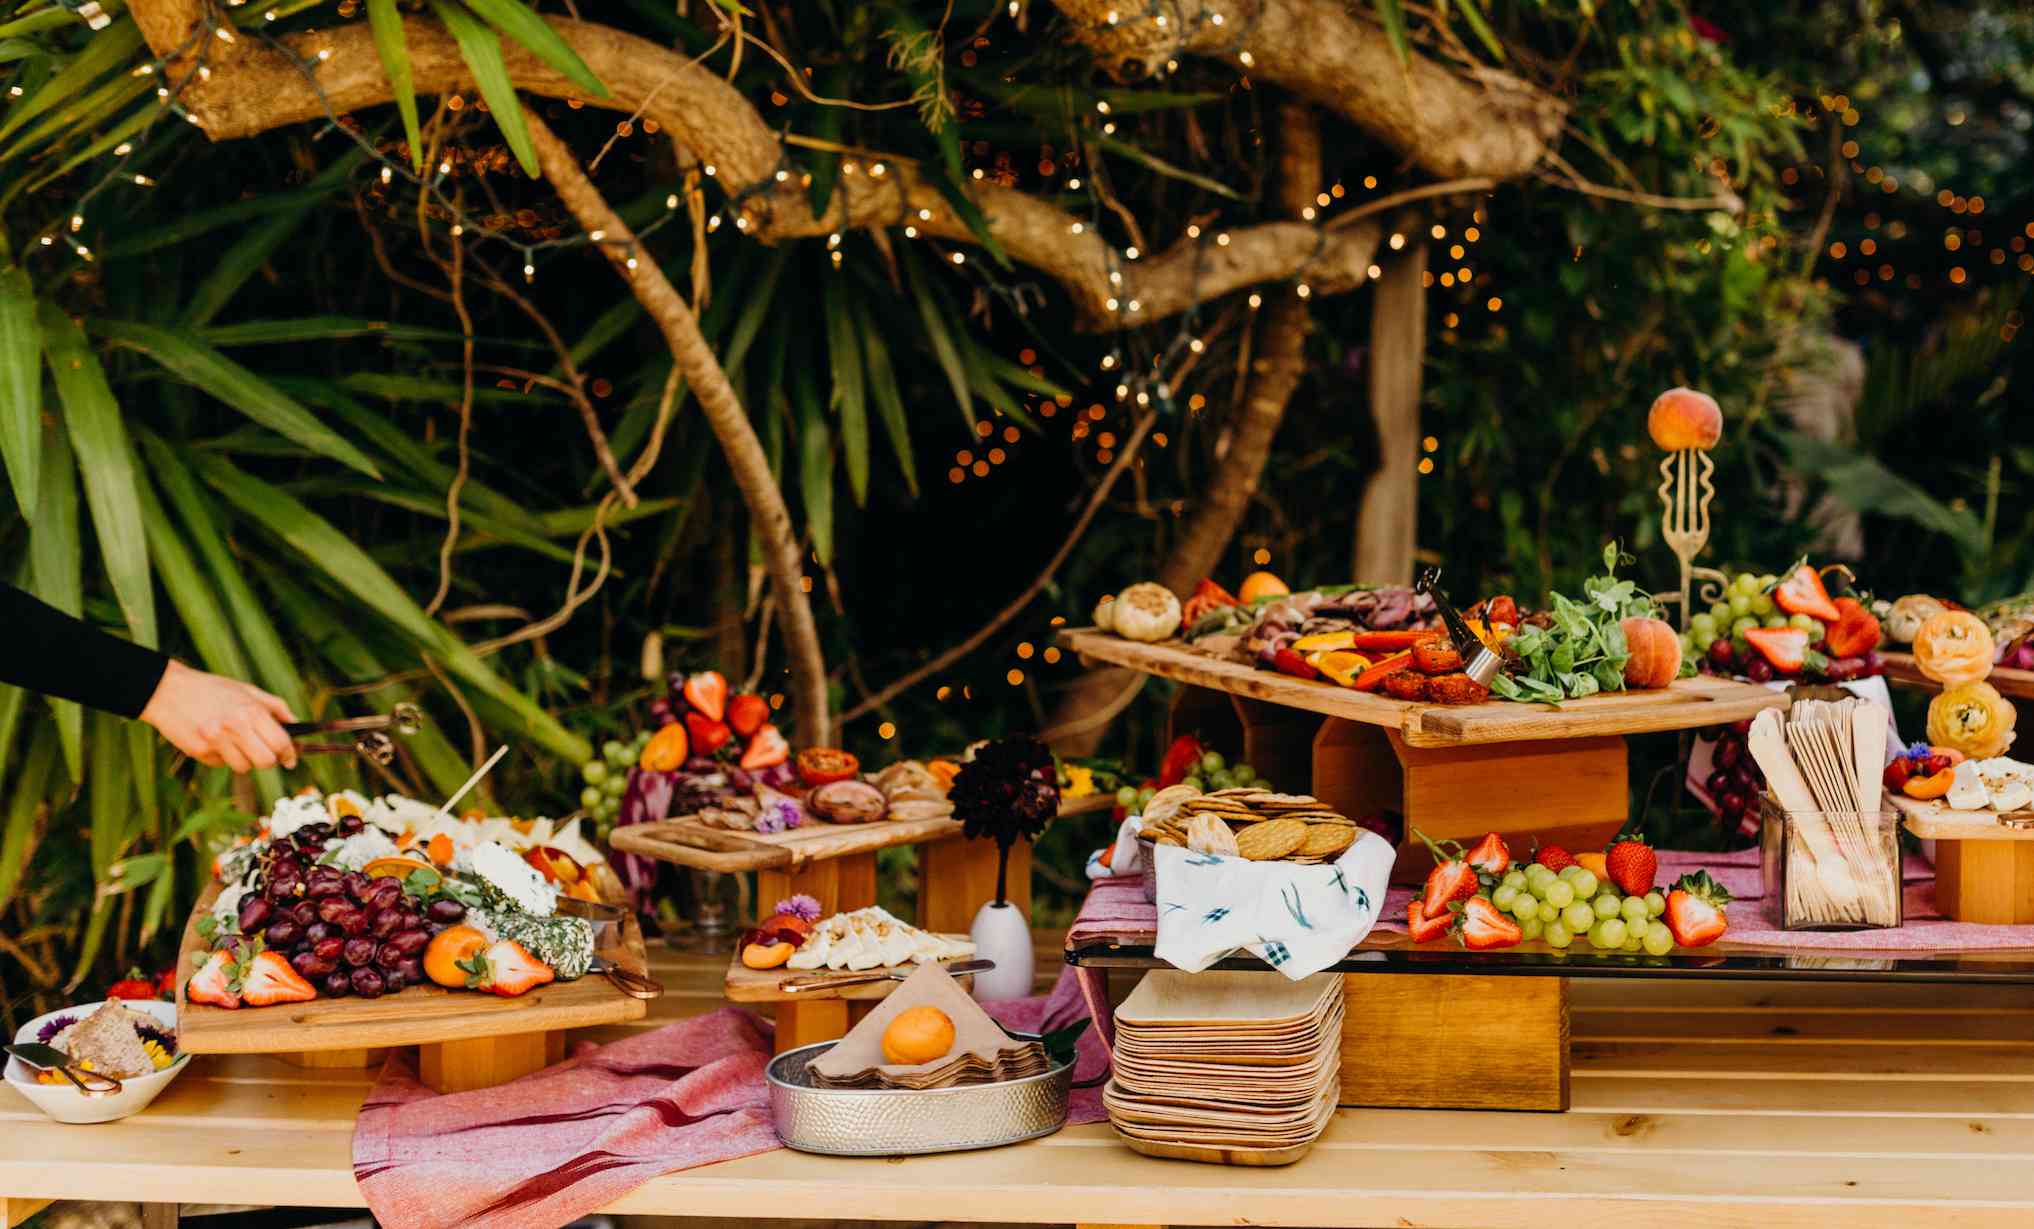 7 healthy tips to stay healthy this wedding season